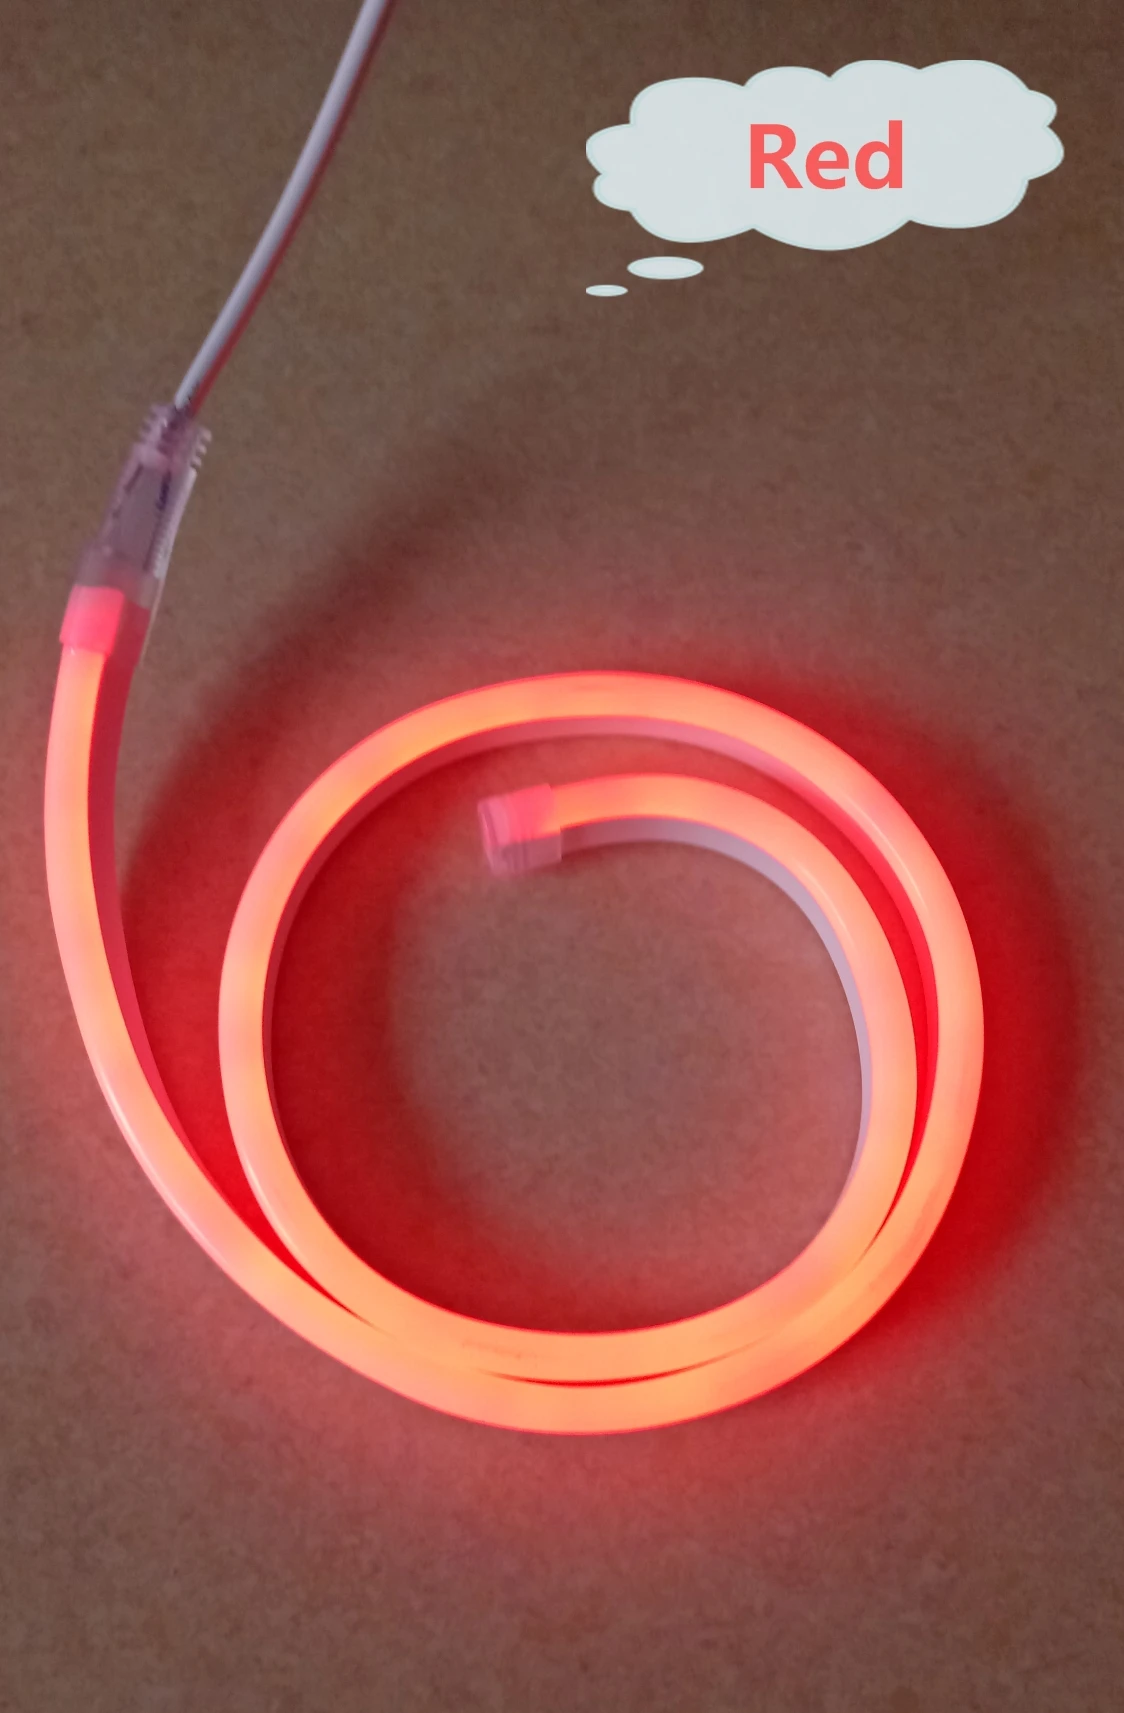 Red Blue Green Yellow Flexible Christmas Decoration 24v Used In City Project Strip Lighting Neon Flex Rgb Led Light